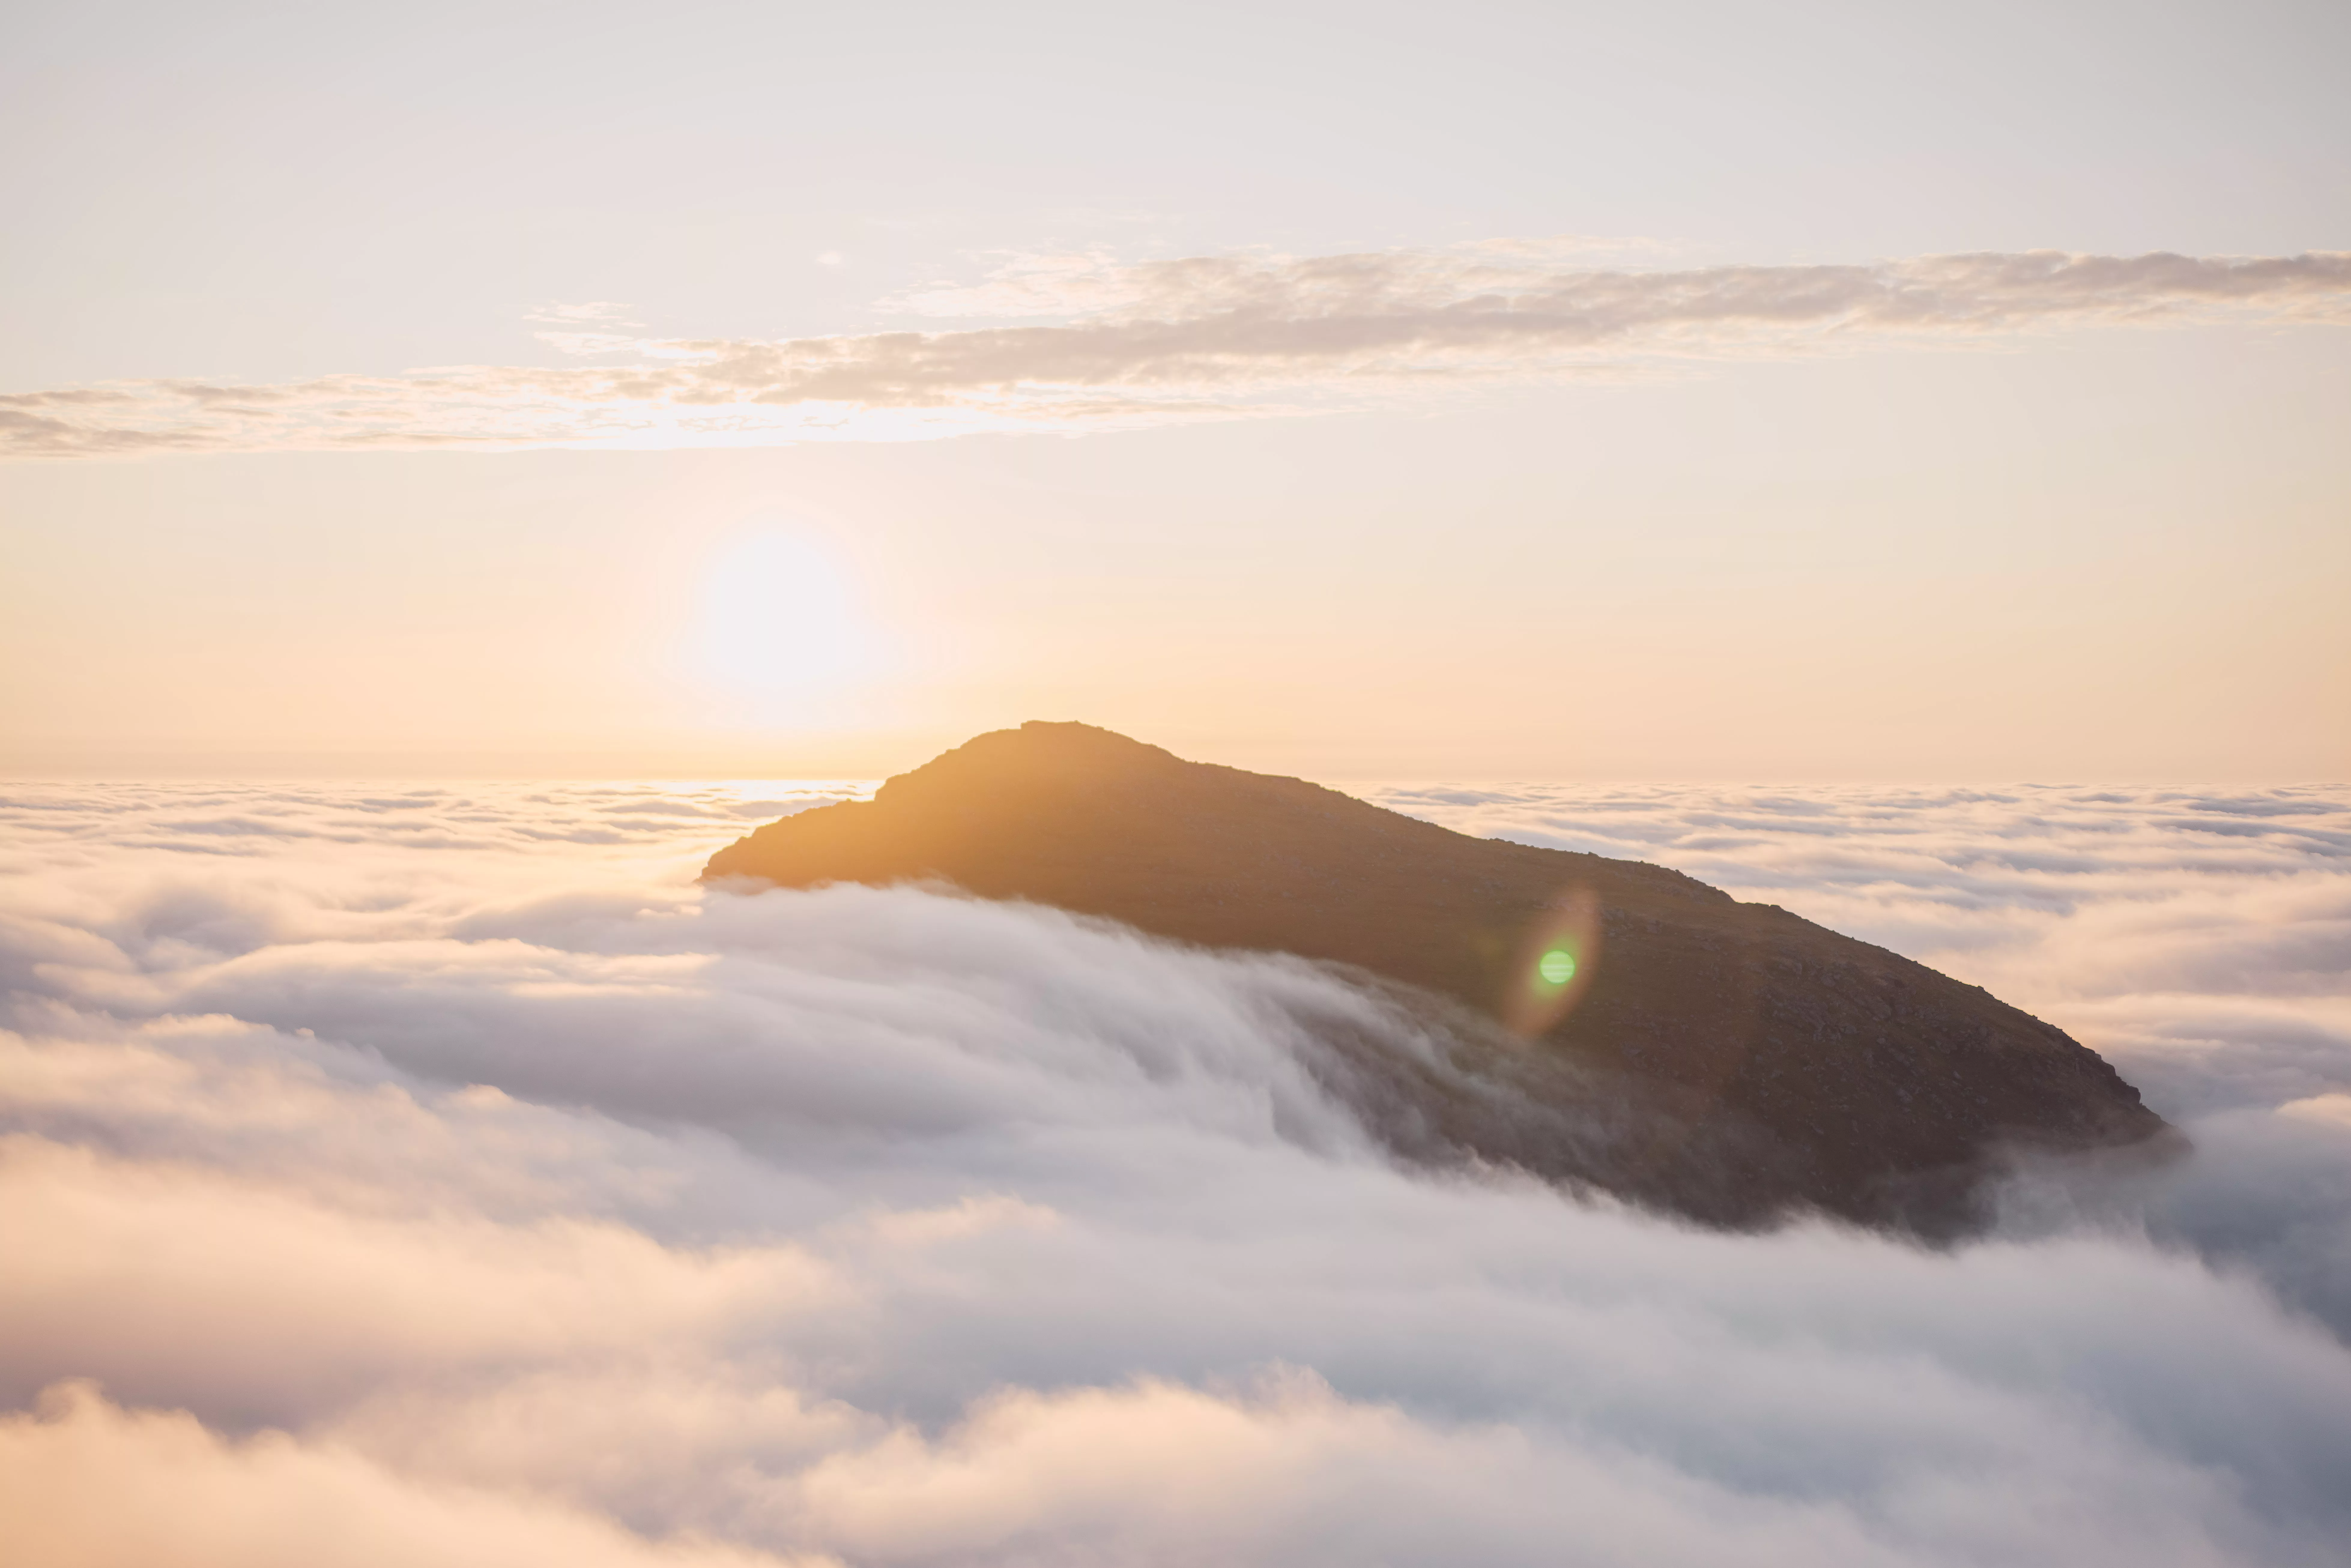 View above the clouds in the Lofoten near Ryten